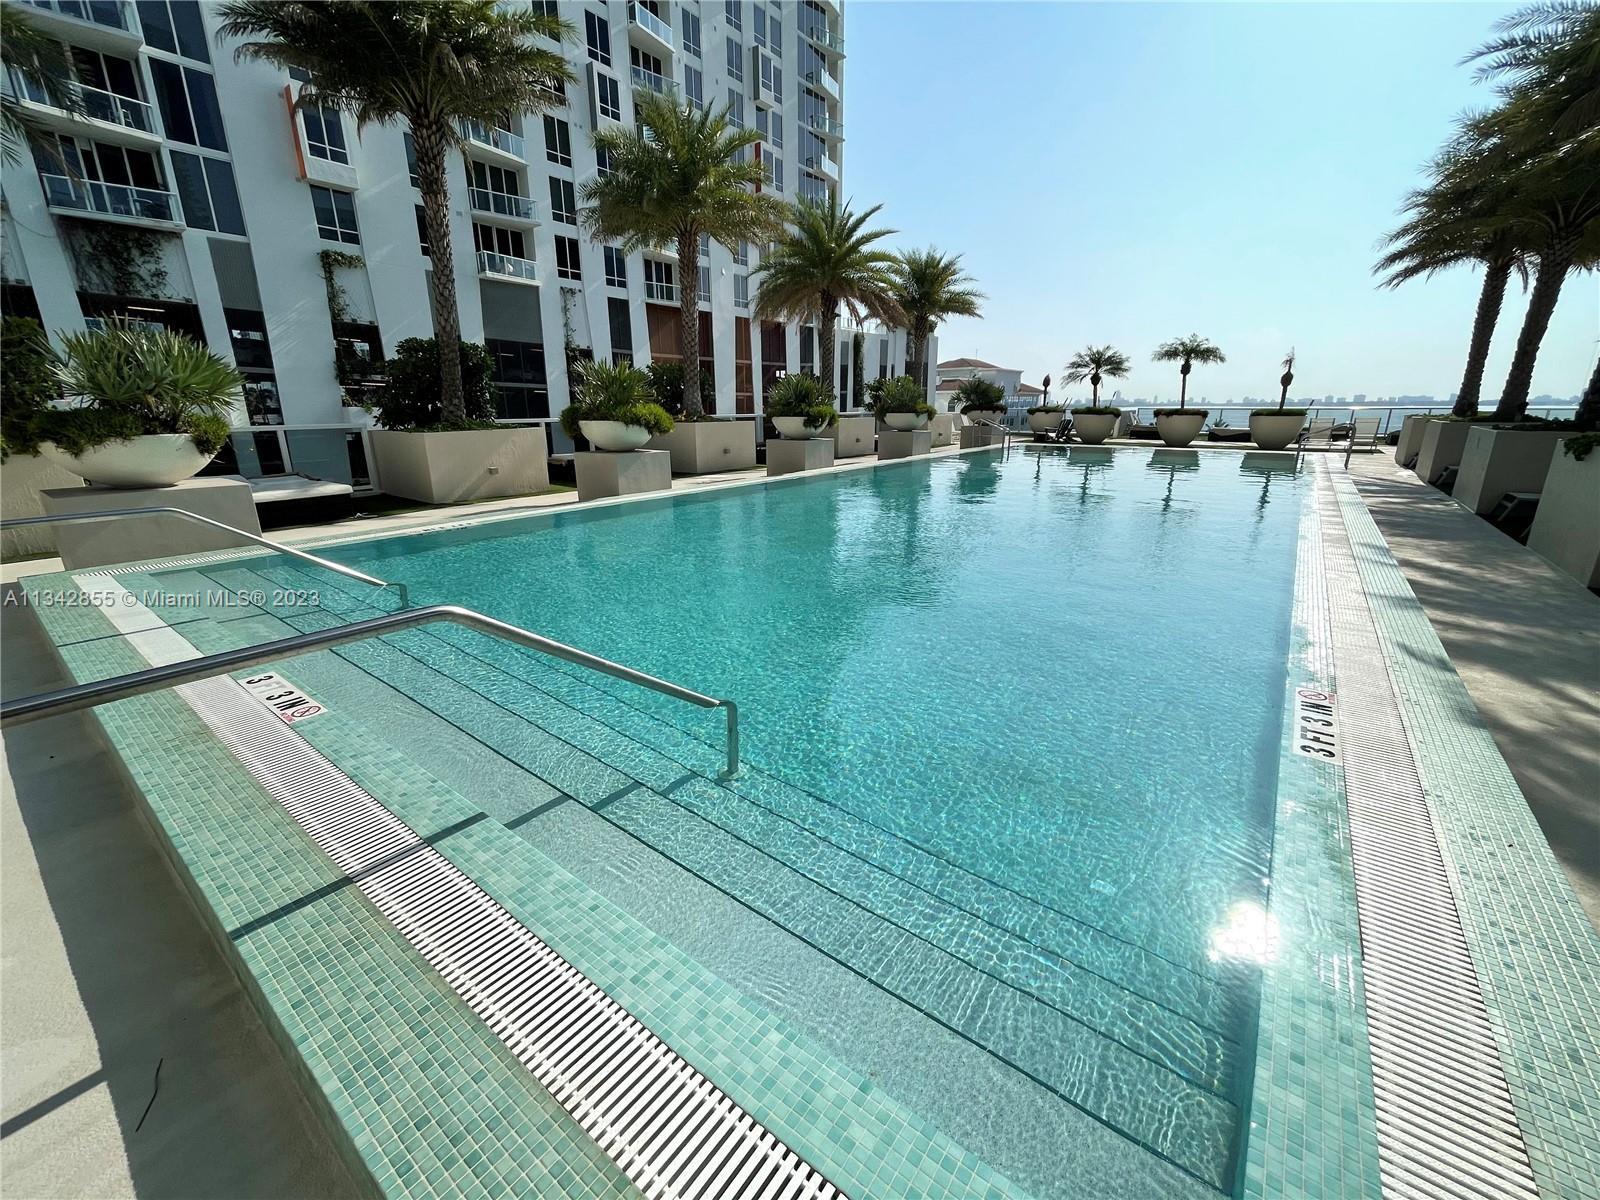 Welcome to Bay House Miami. 
A luxury apartment with 3 bedrooms and 3 en-suite bathrooms.
An elega